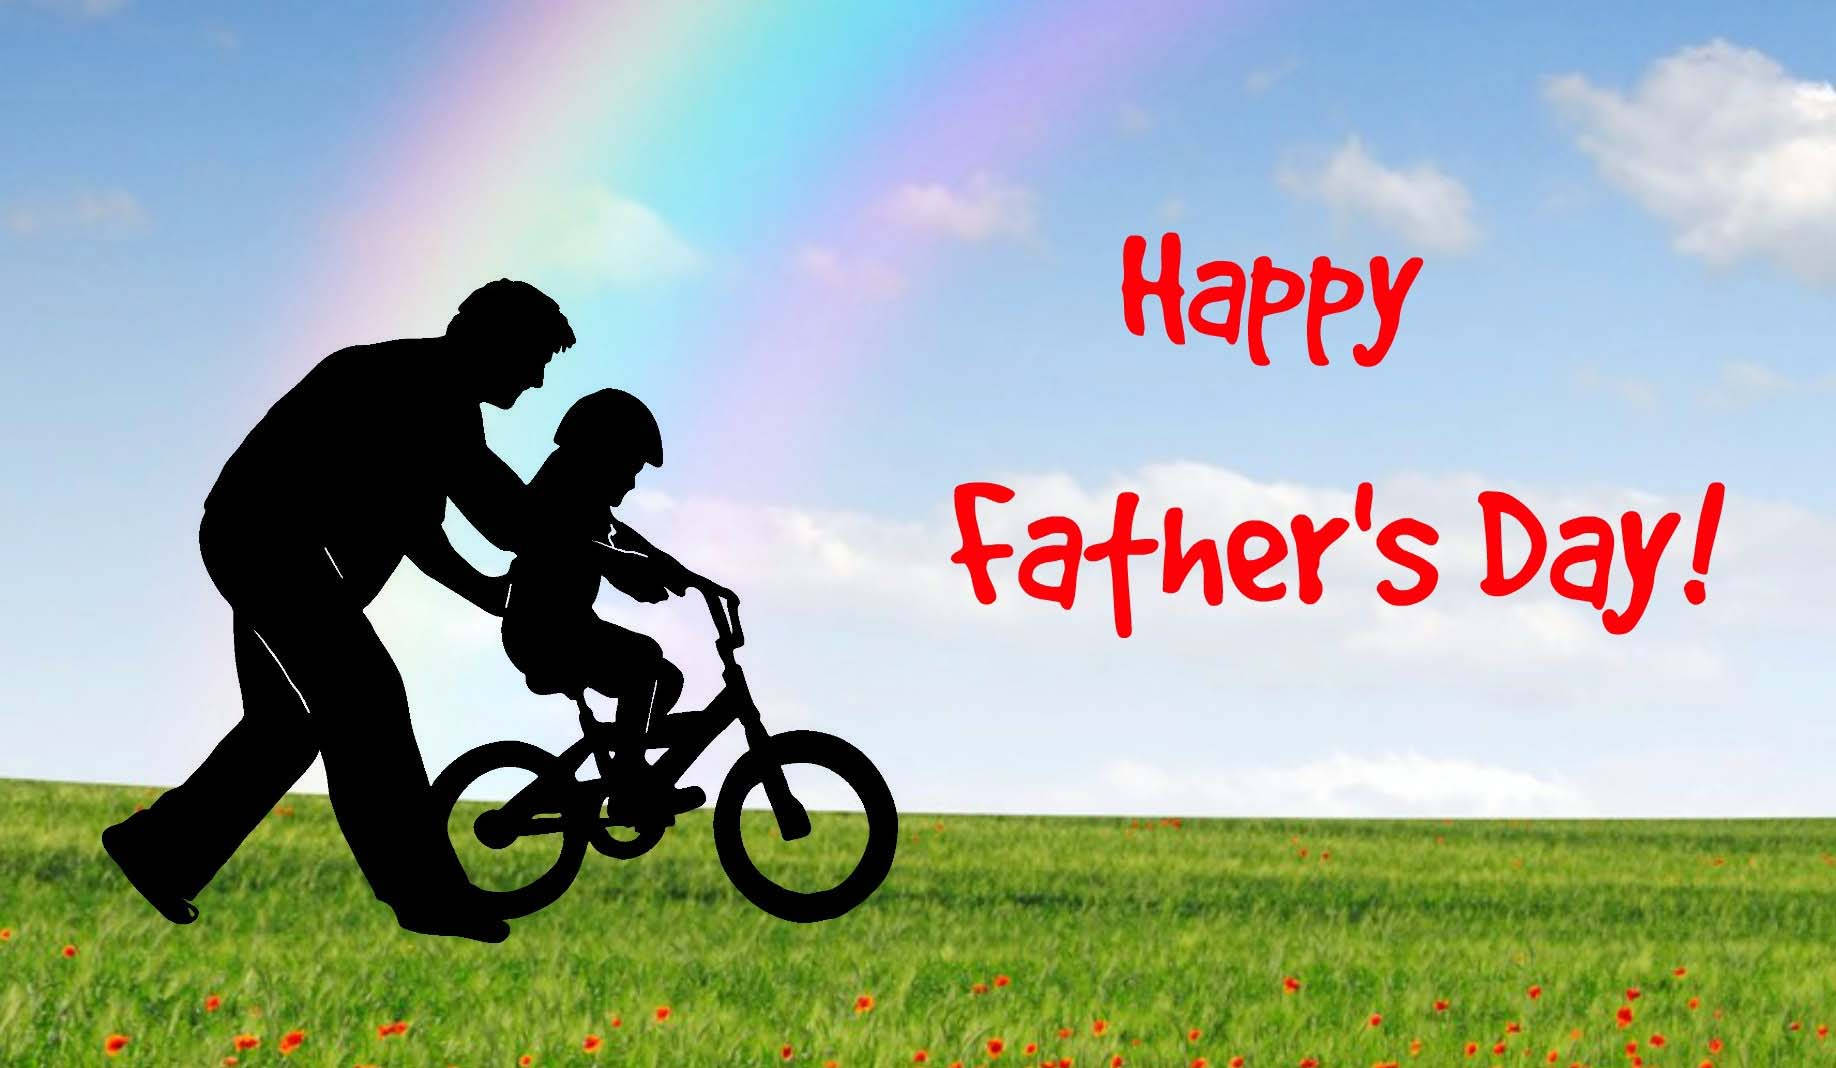 Bike Ride On Father's Day